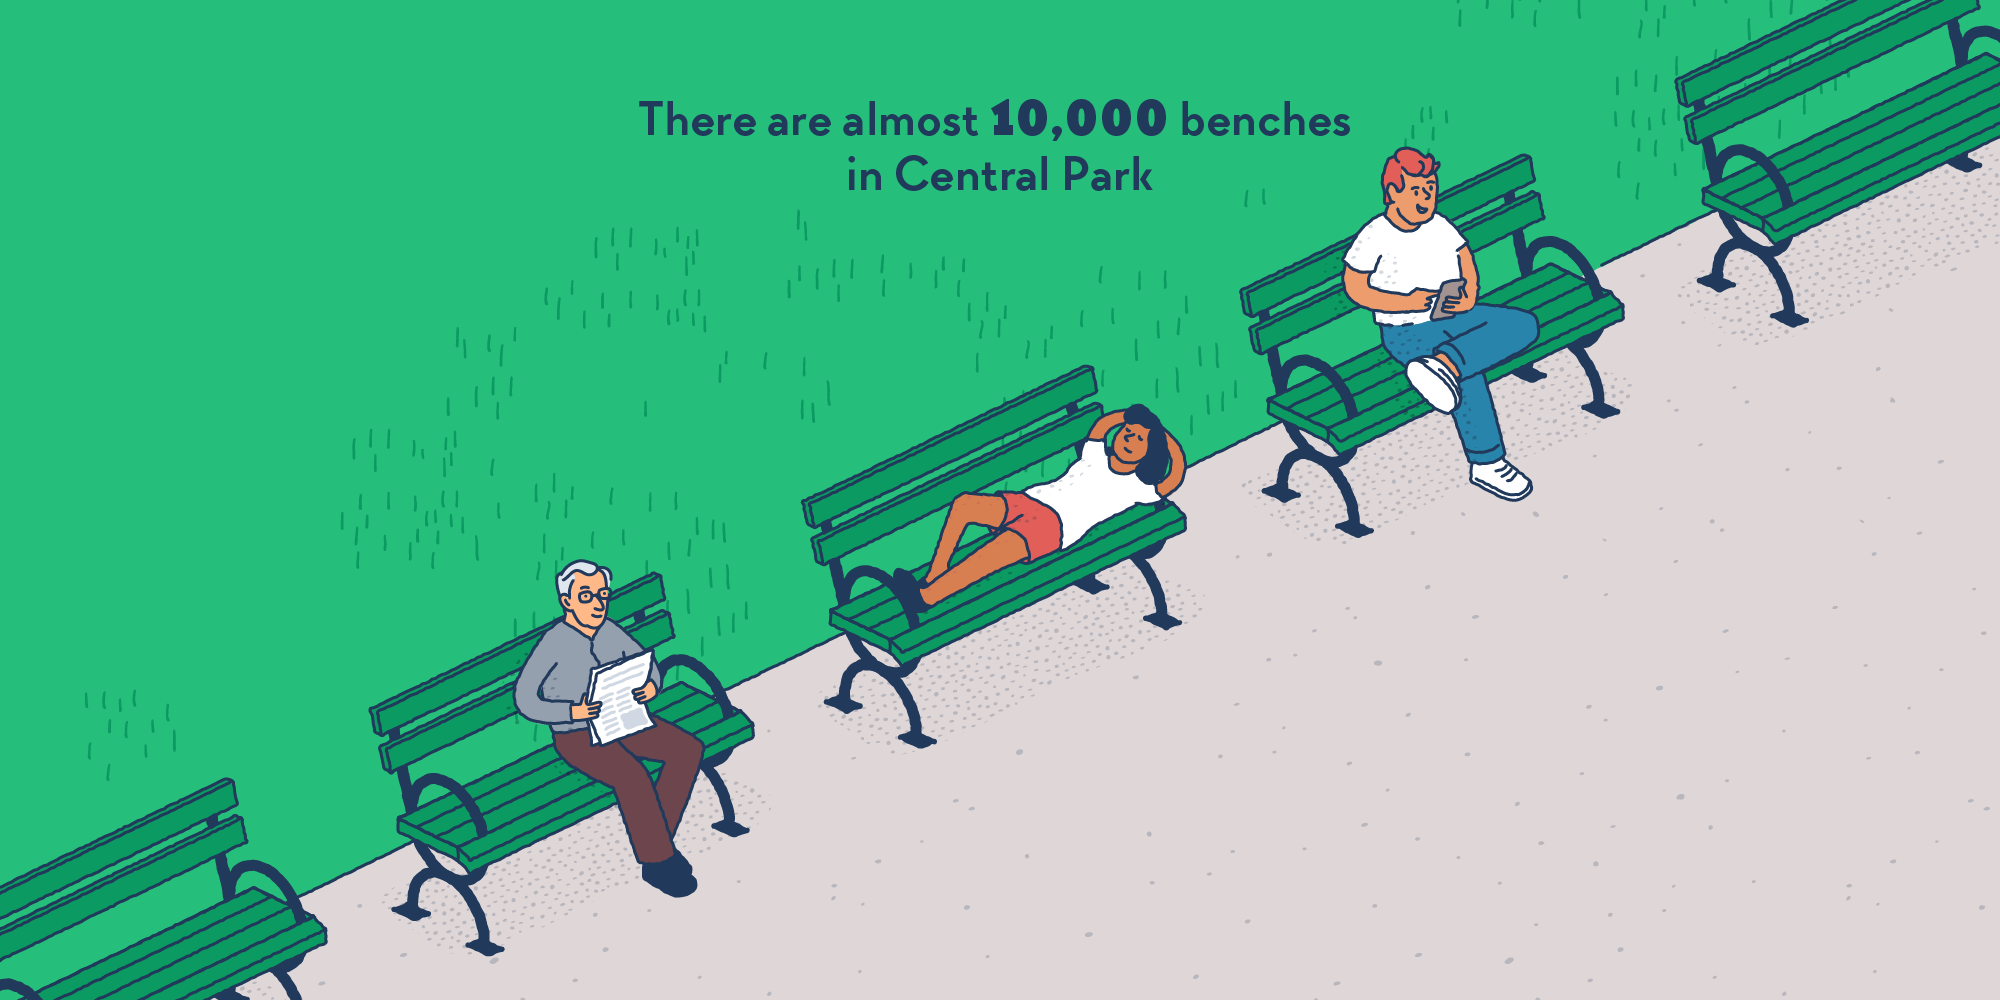 A long series of benches in Central Park, with various people sitting on them.